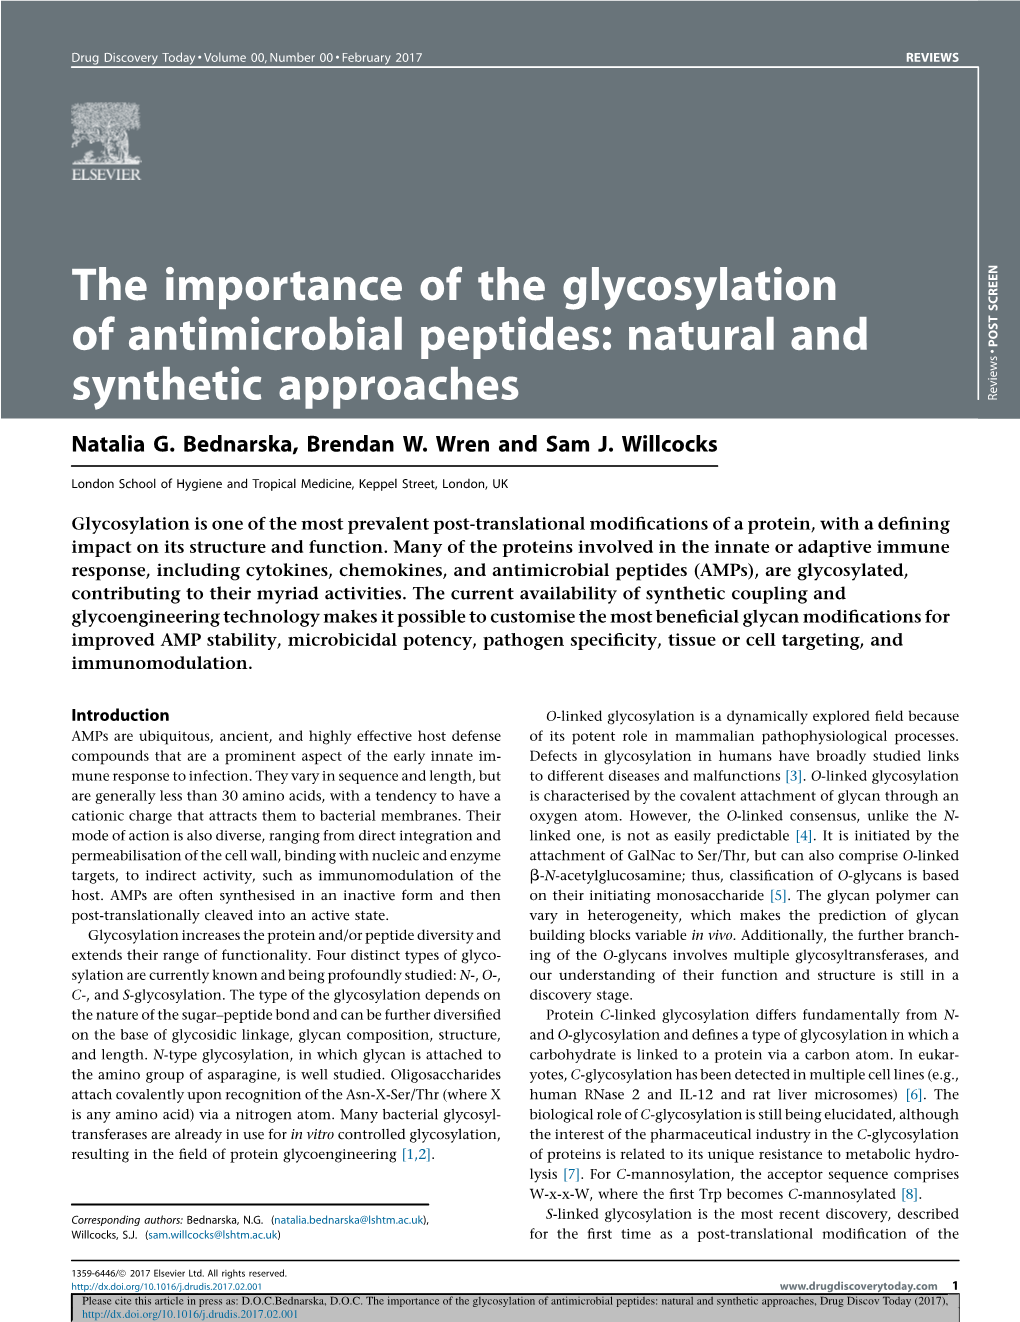 The Importance of the Glycosylation of Antimicrobial Peptides: Natural And